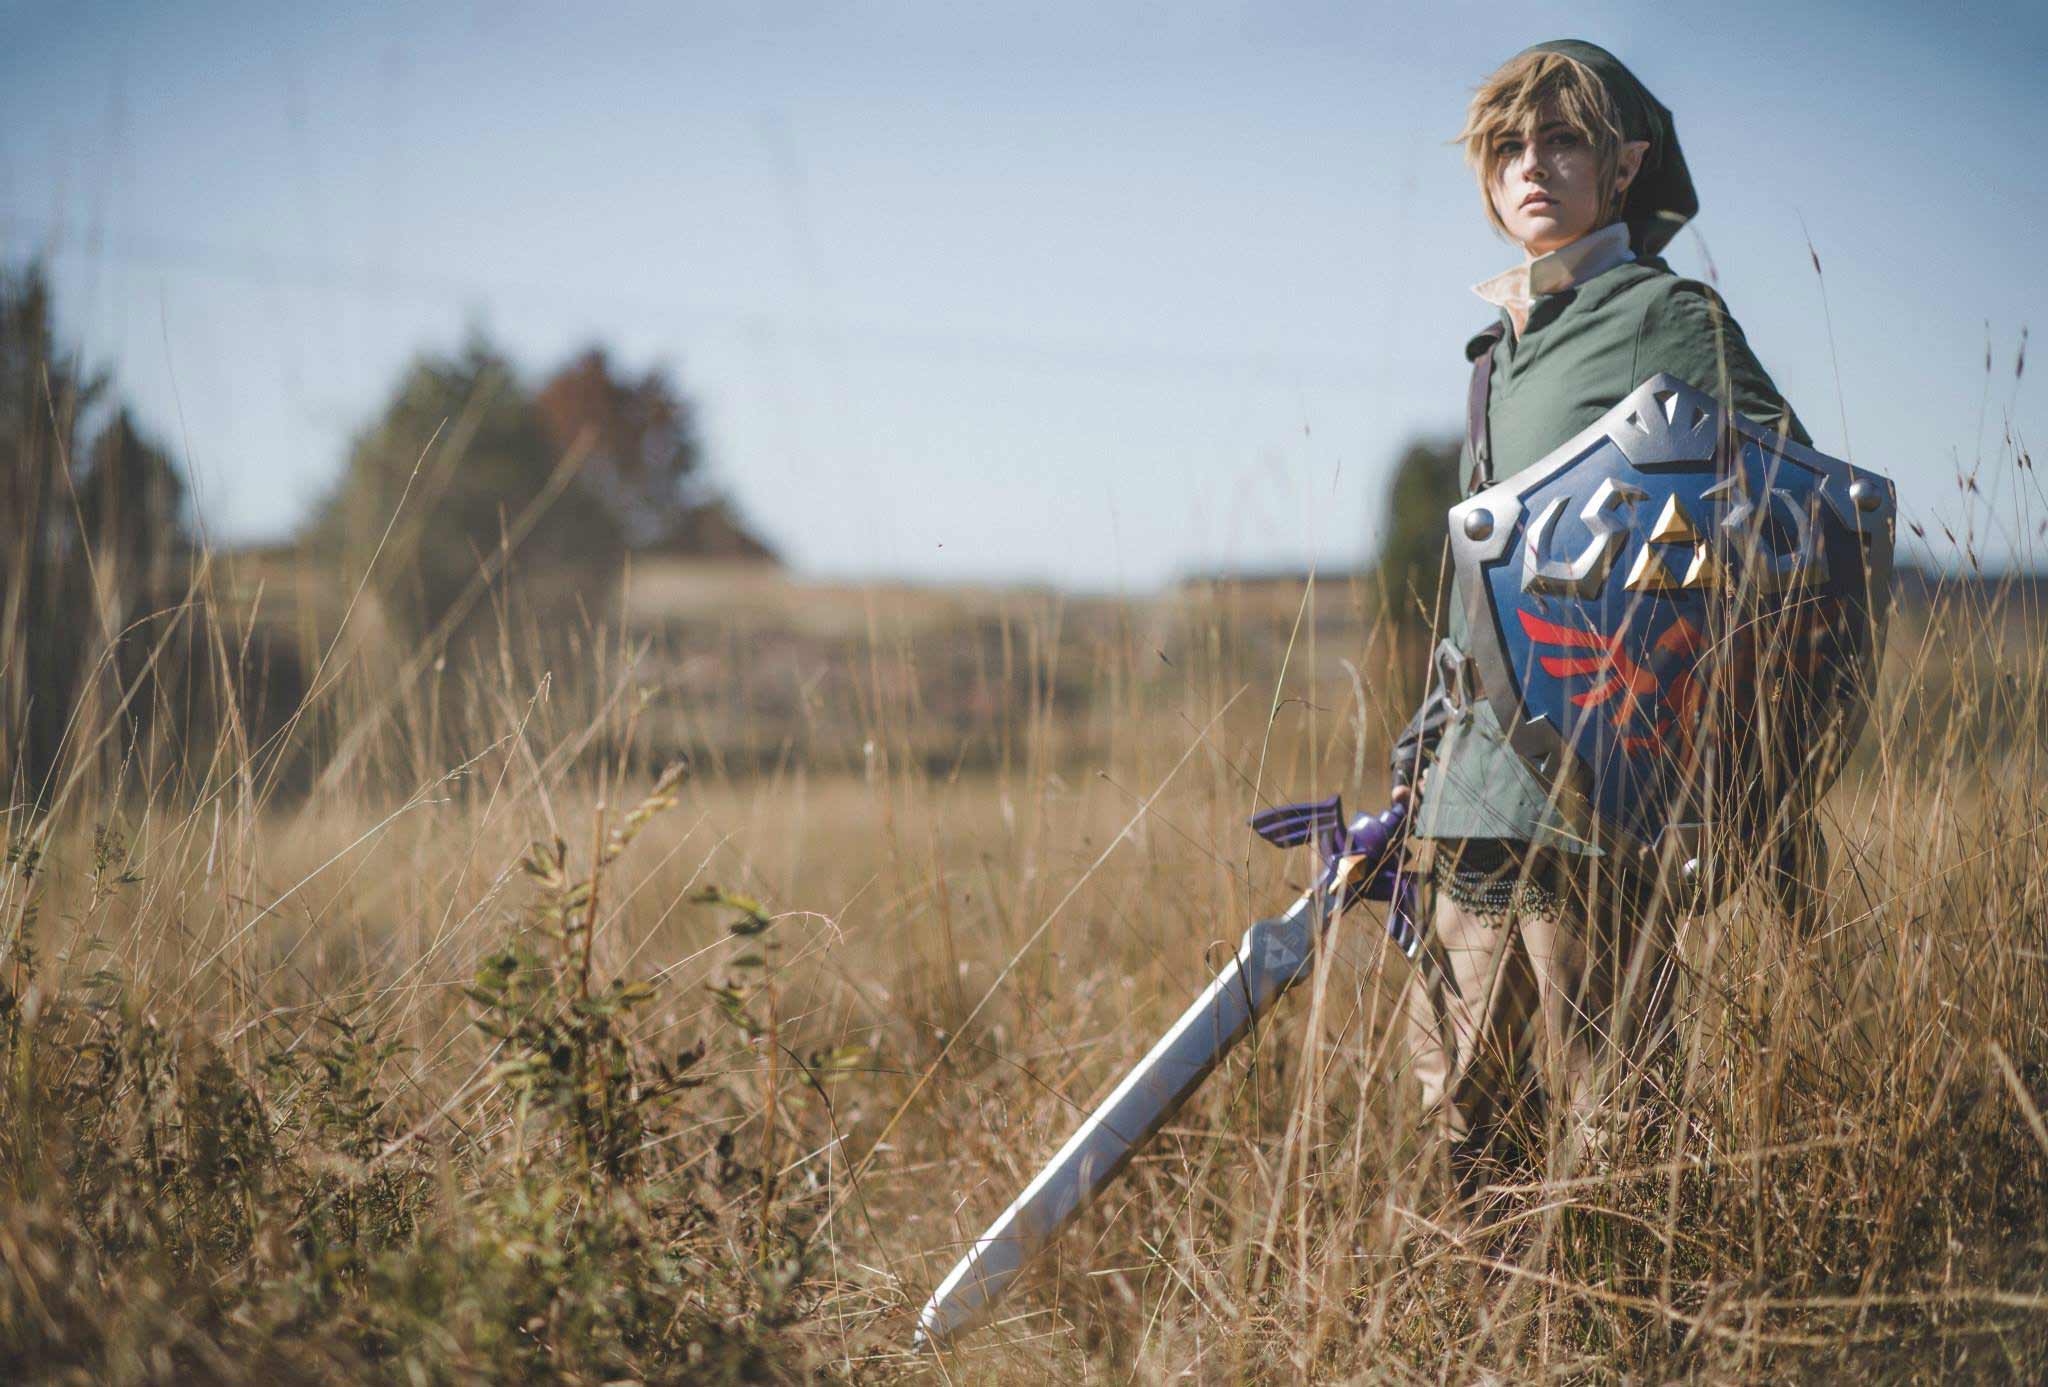 Cosplay Friday: The Legend of Zelda by techgnotic on DeviantArt